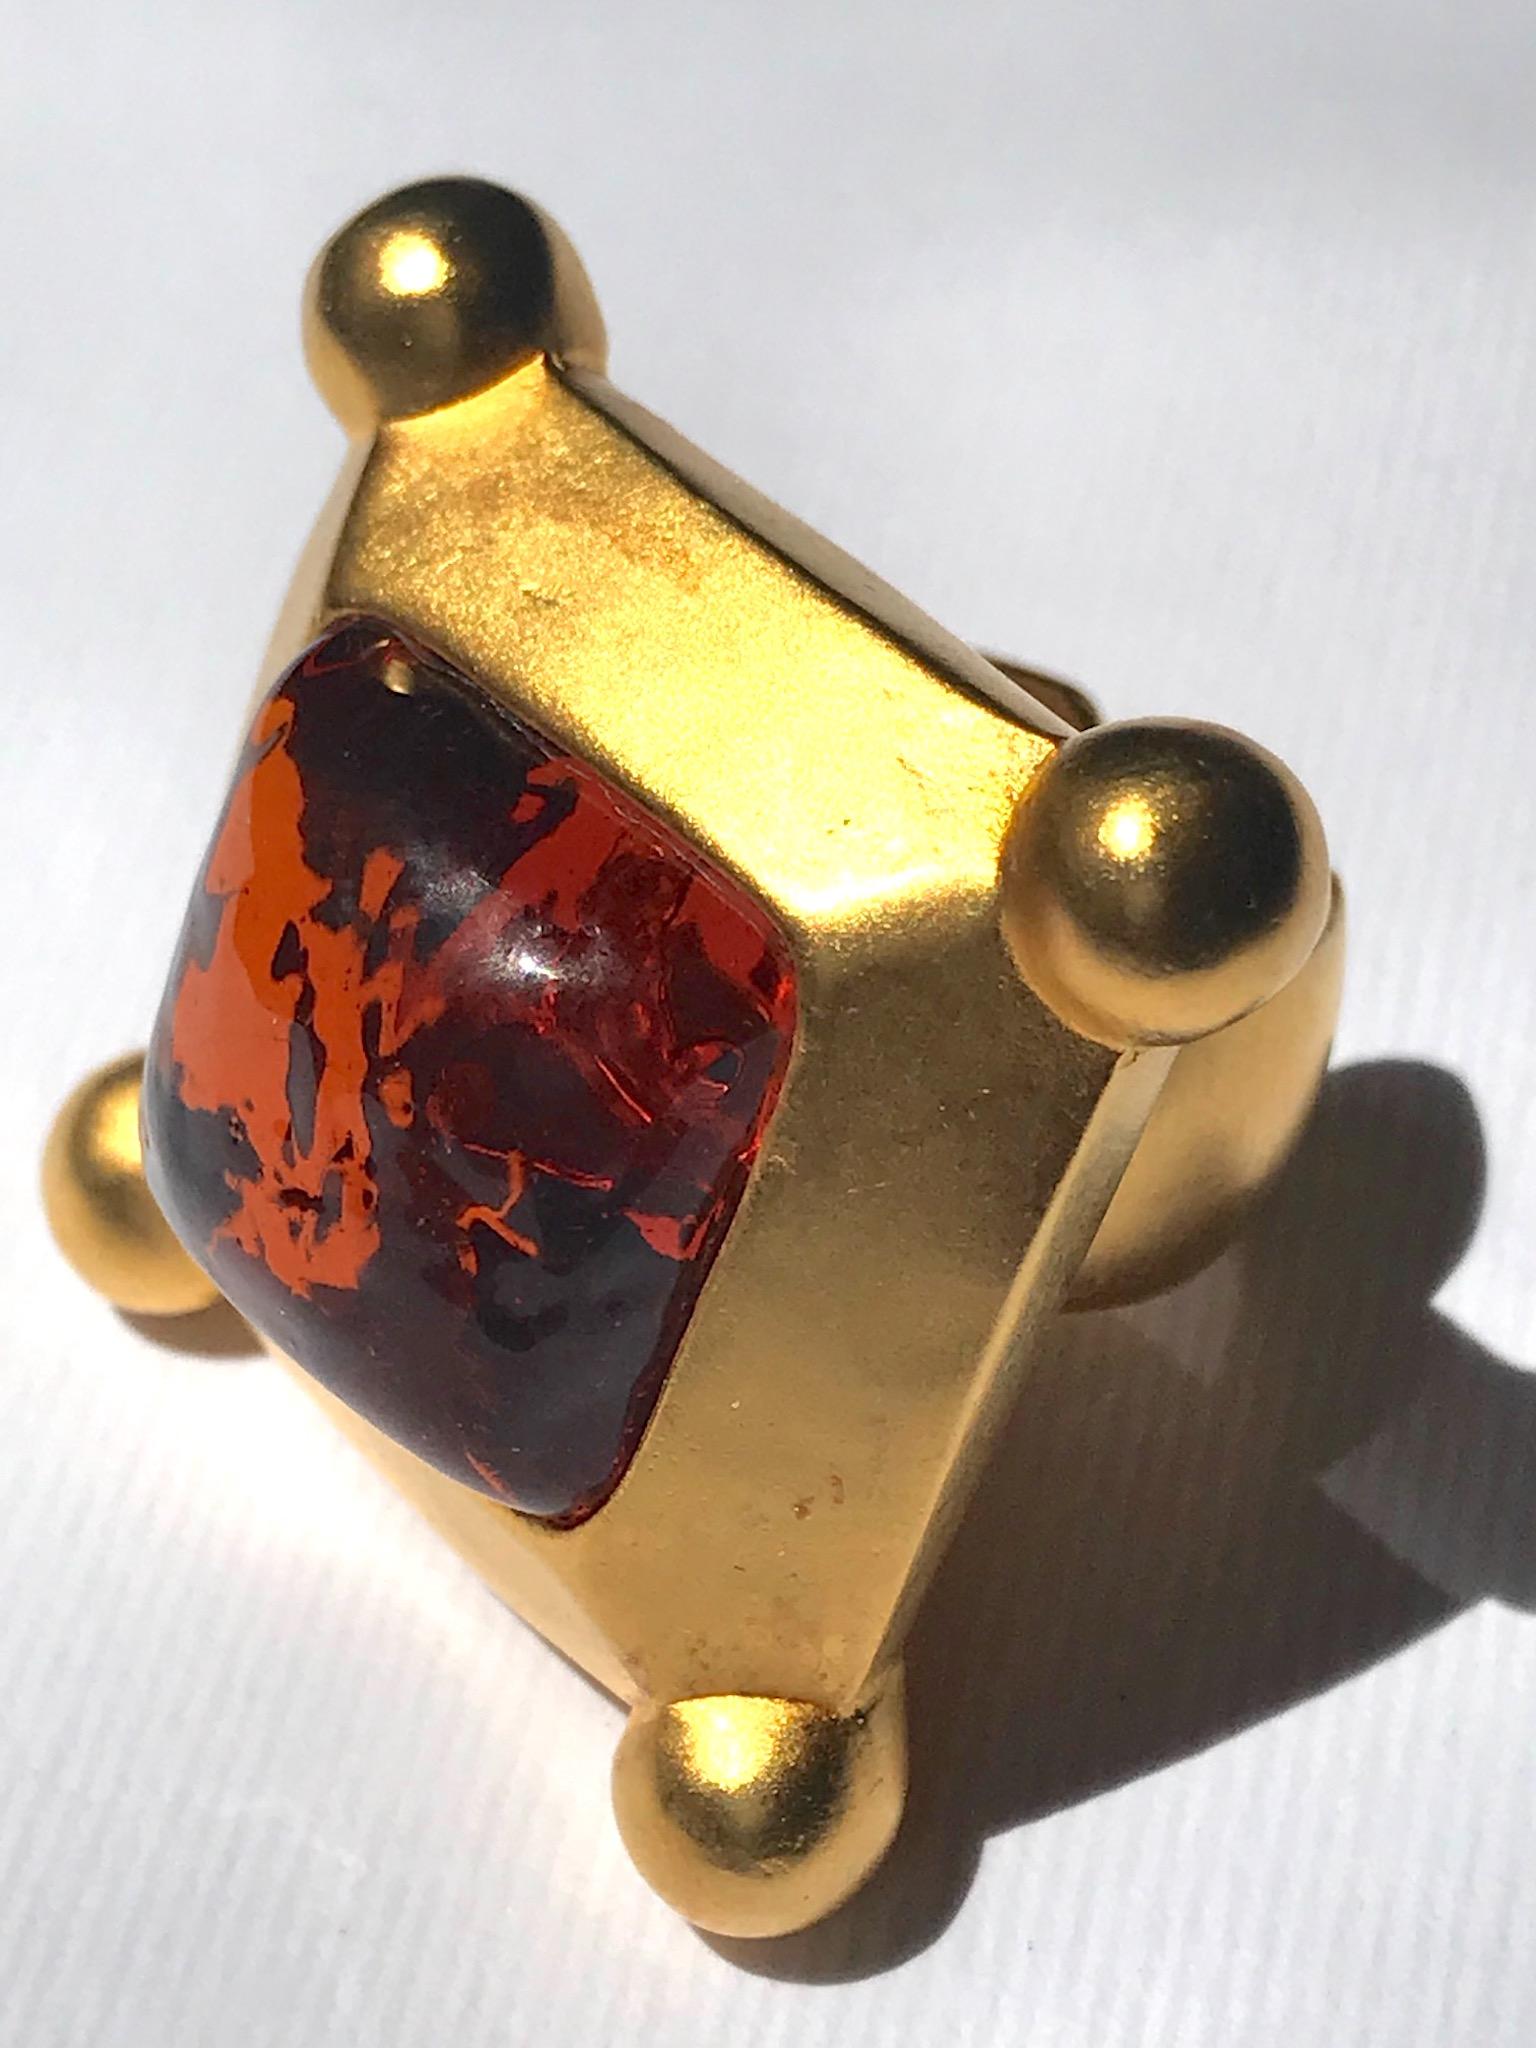 A rare 1980s satin gold finish ring with poured glass stone by Karl Lagerfeld. The square amber glass stone has a polished mottled texture. It is perfectly mounted into the setting from the back and fixed in place with prongs. The ring is cast in a